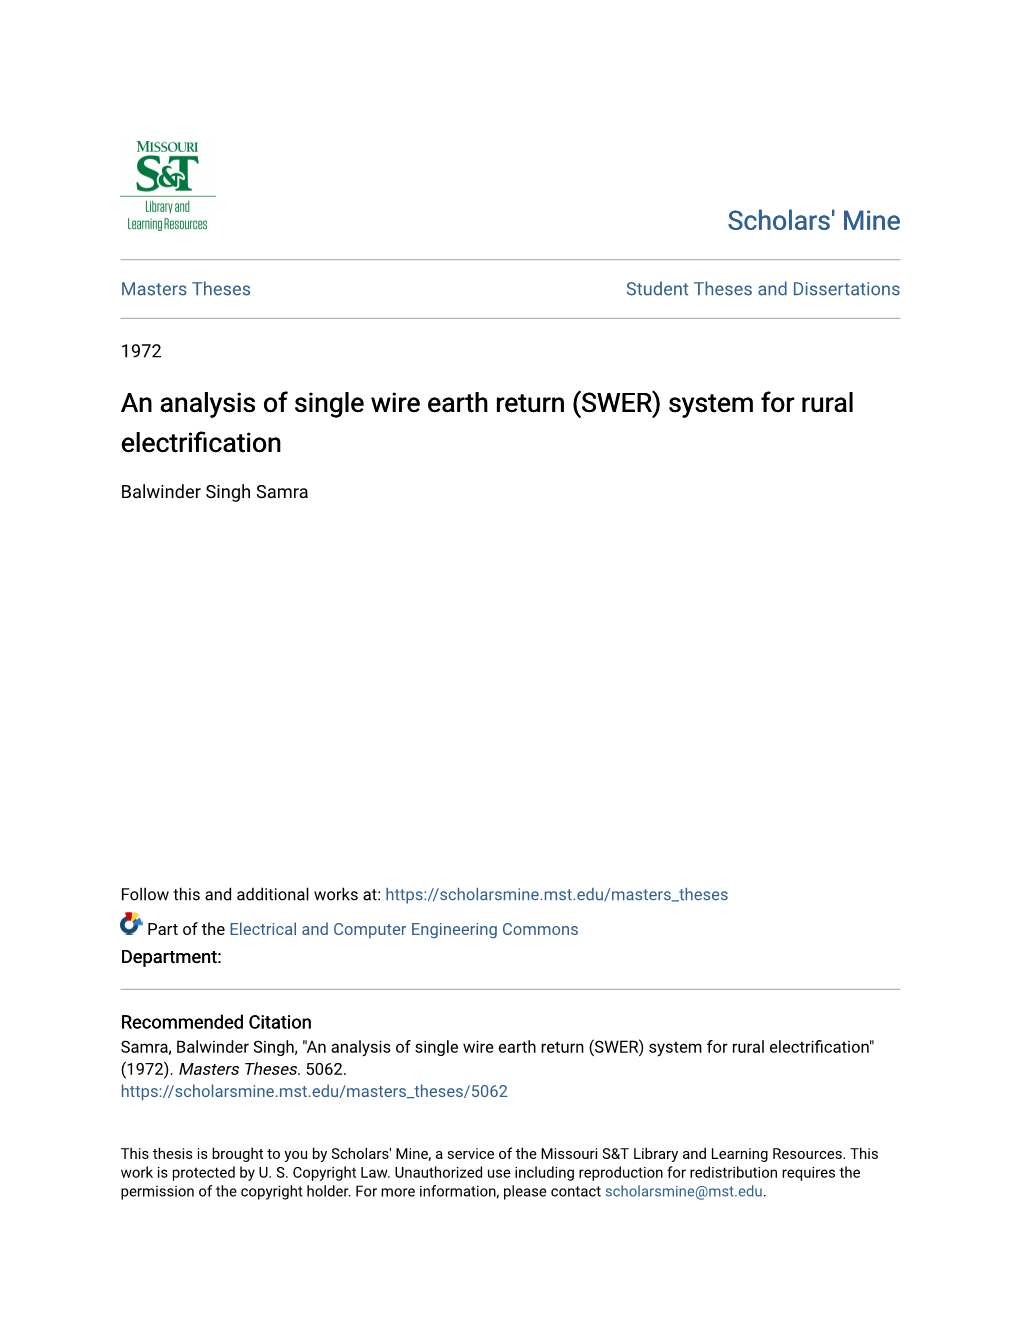 An Analysis of Single Wire Earth Return (SWER) System for Rural Electrification